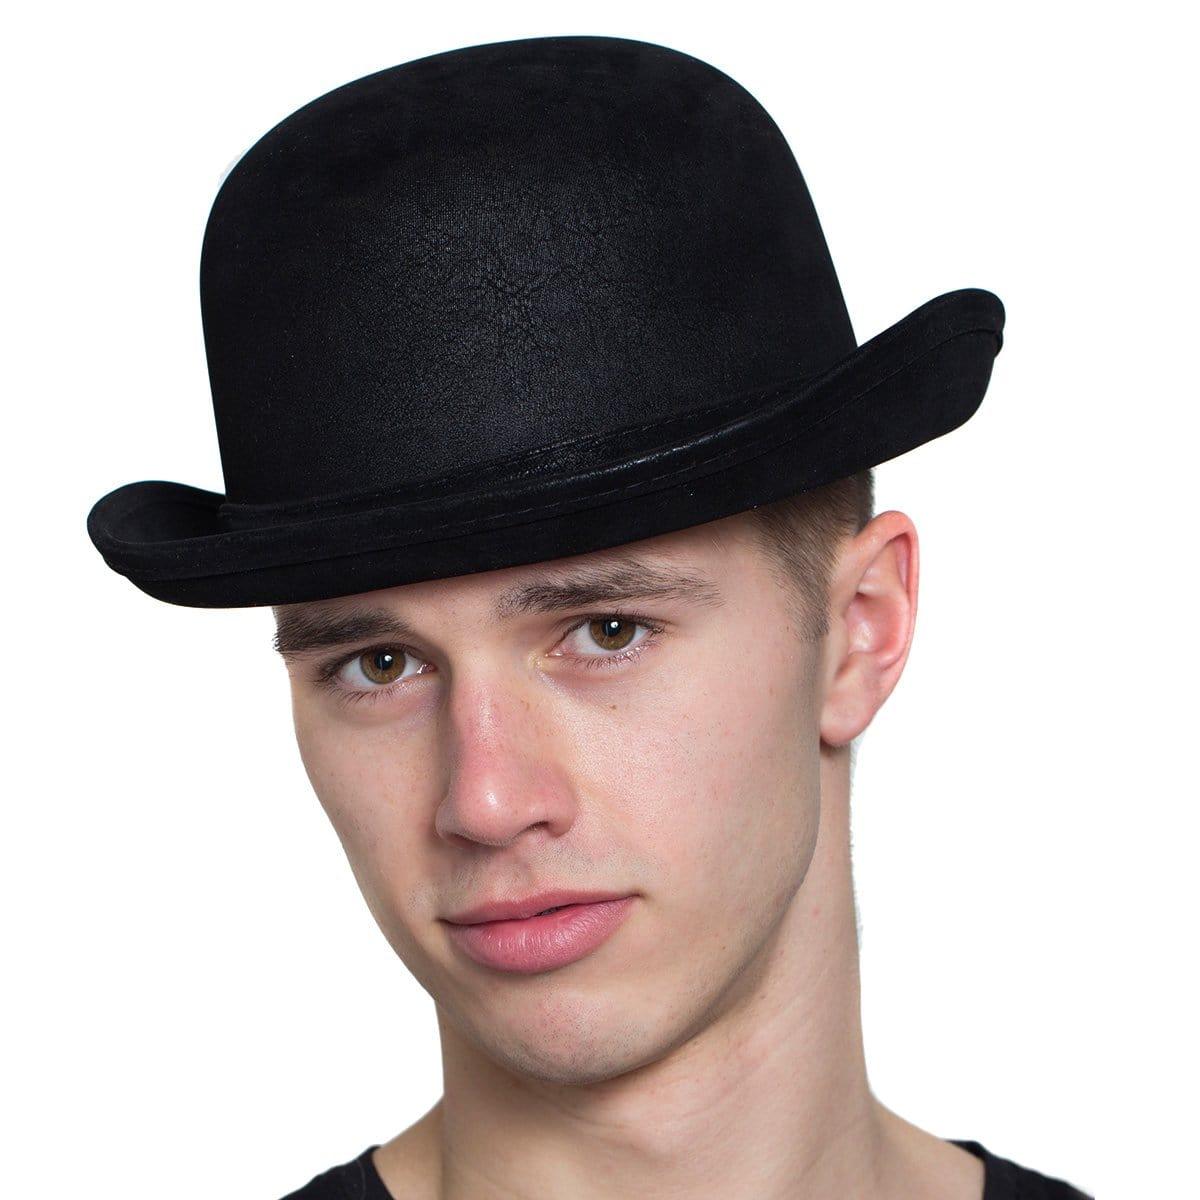 Buy Costume Accessories Black leatherlike derby hat for adults sold at Party Expert